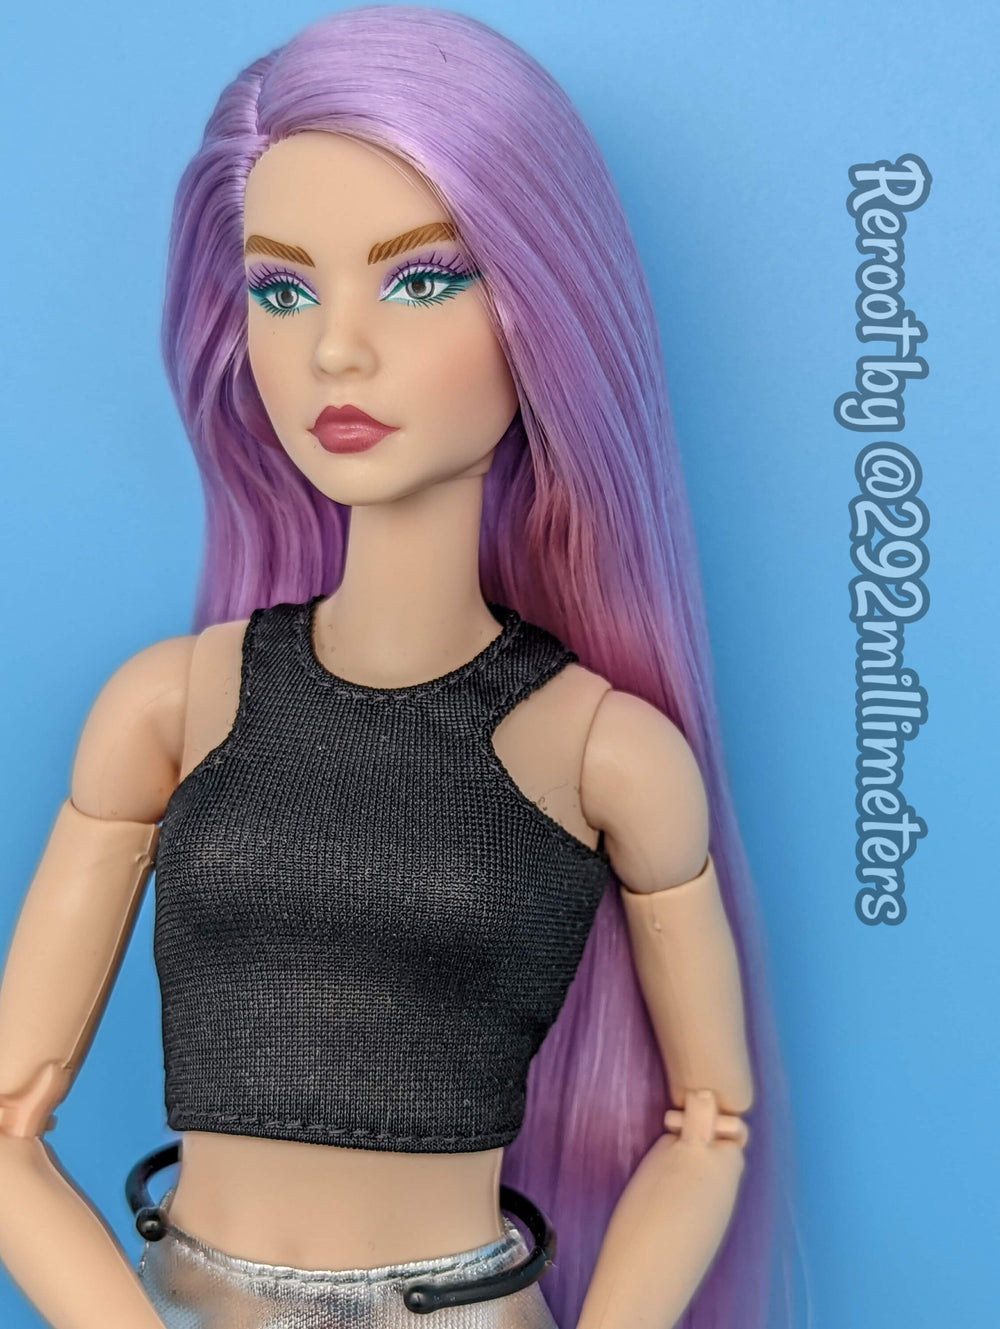 DG-HQ™ Nylon African Violet JN228A purple Reroot Styling Doll Barbie™ Monster High™ Rainbow High® The Doll Planet Hair